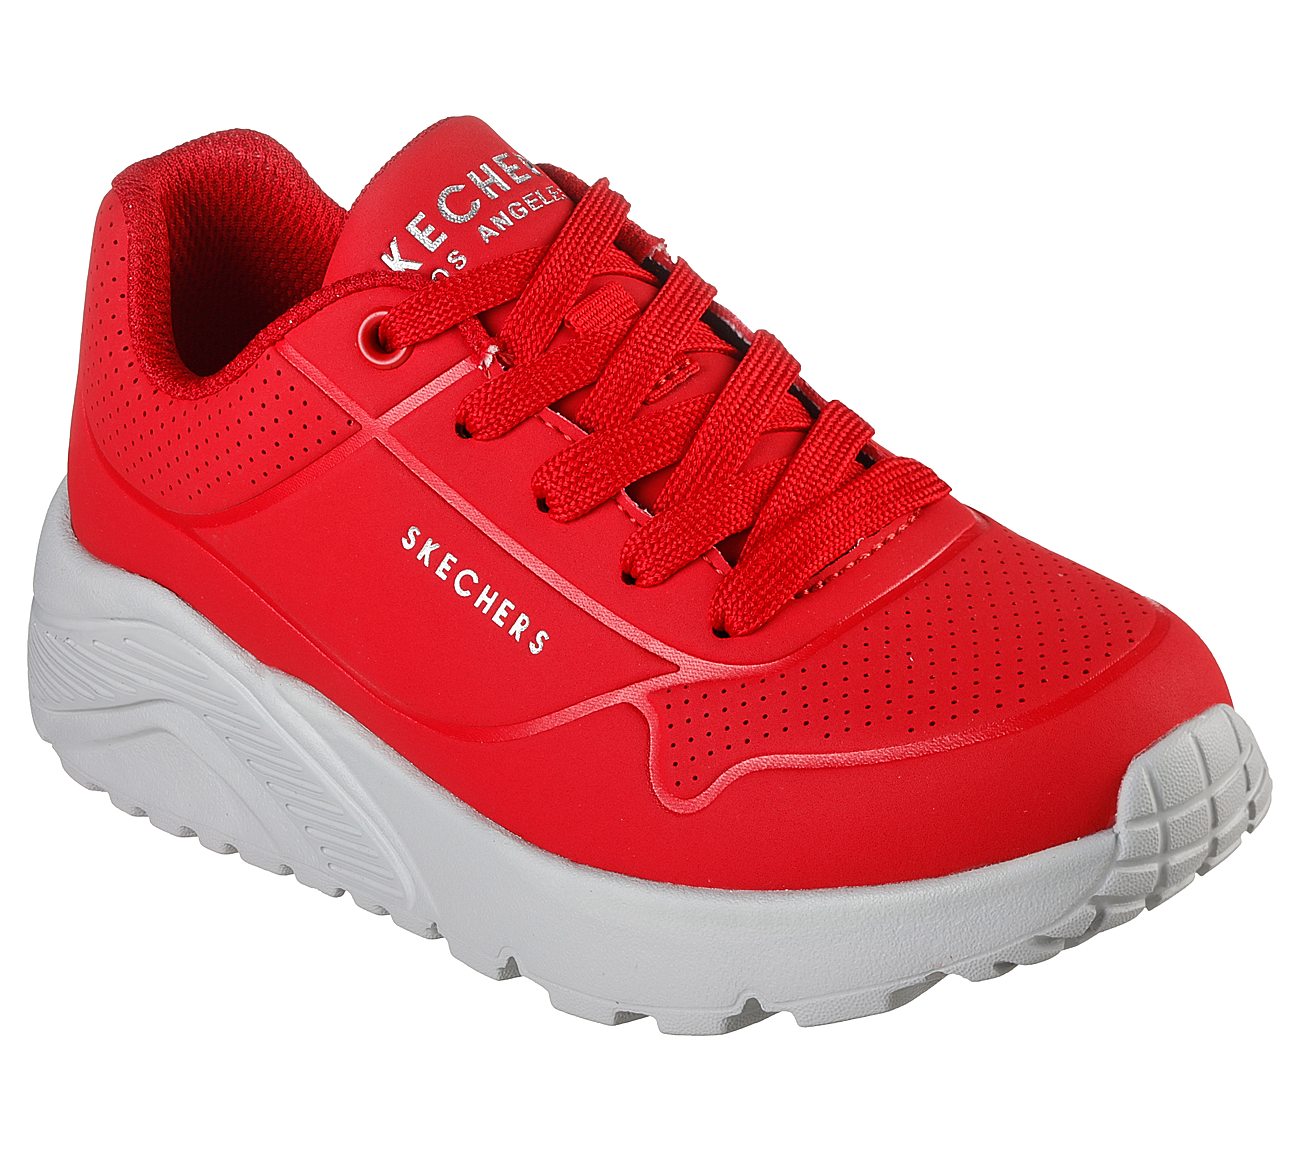 UNO LITE - DELODOX, RRED Footwear Lateral View